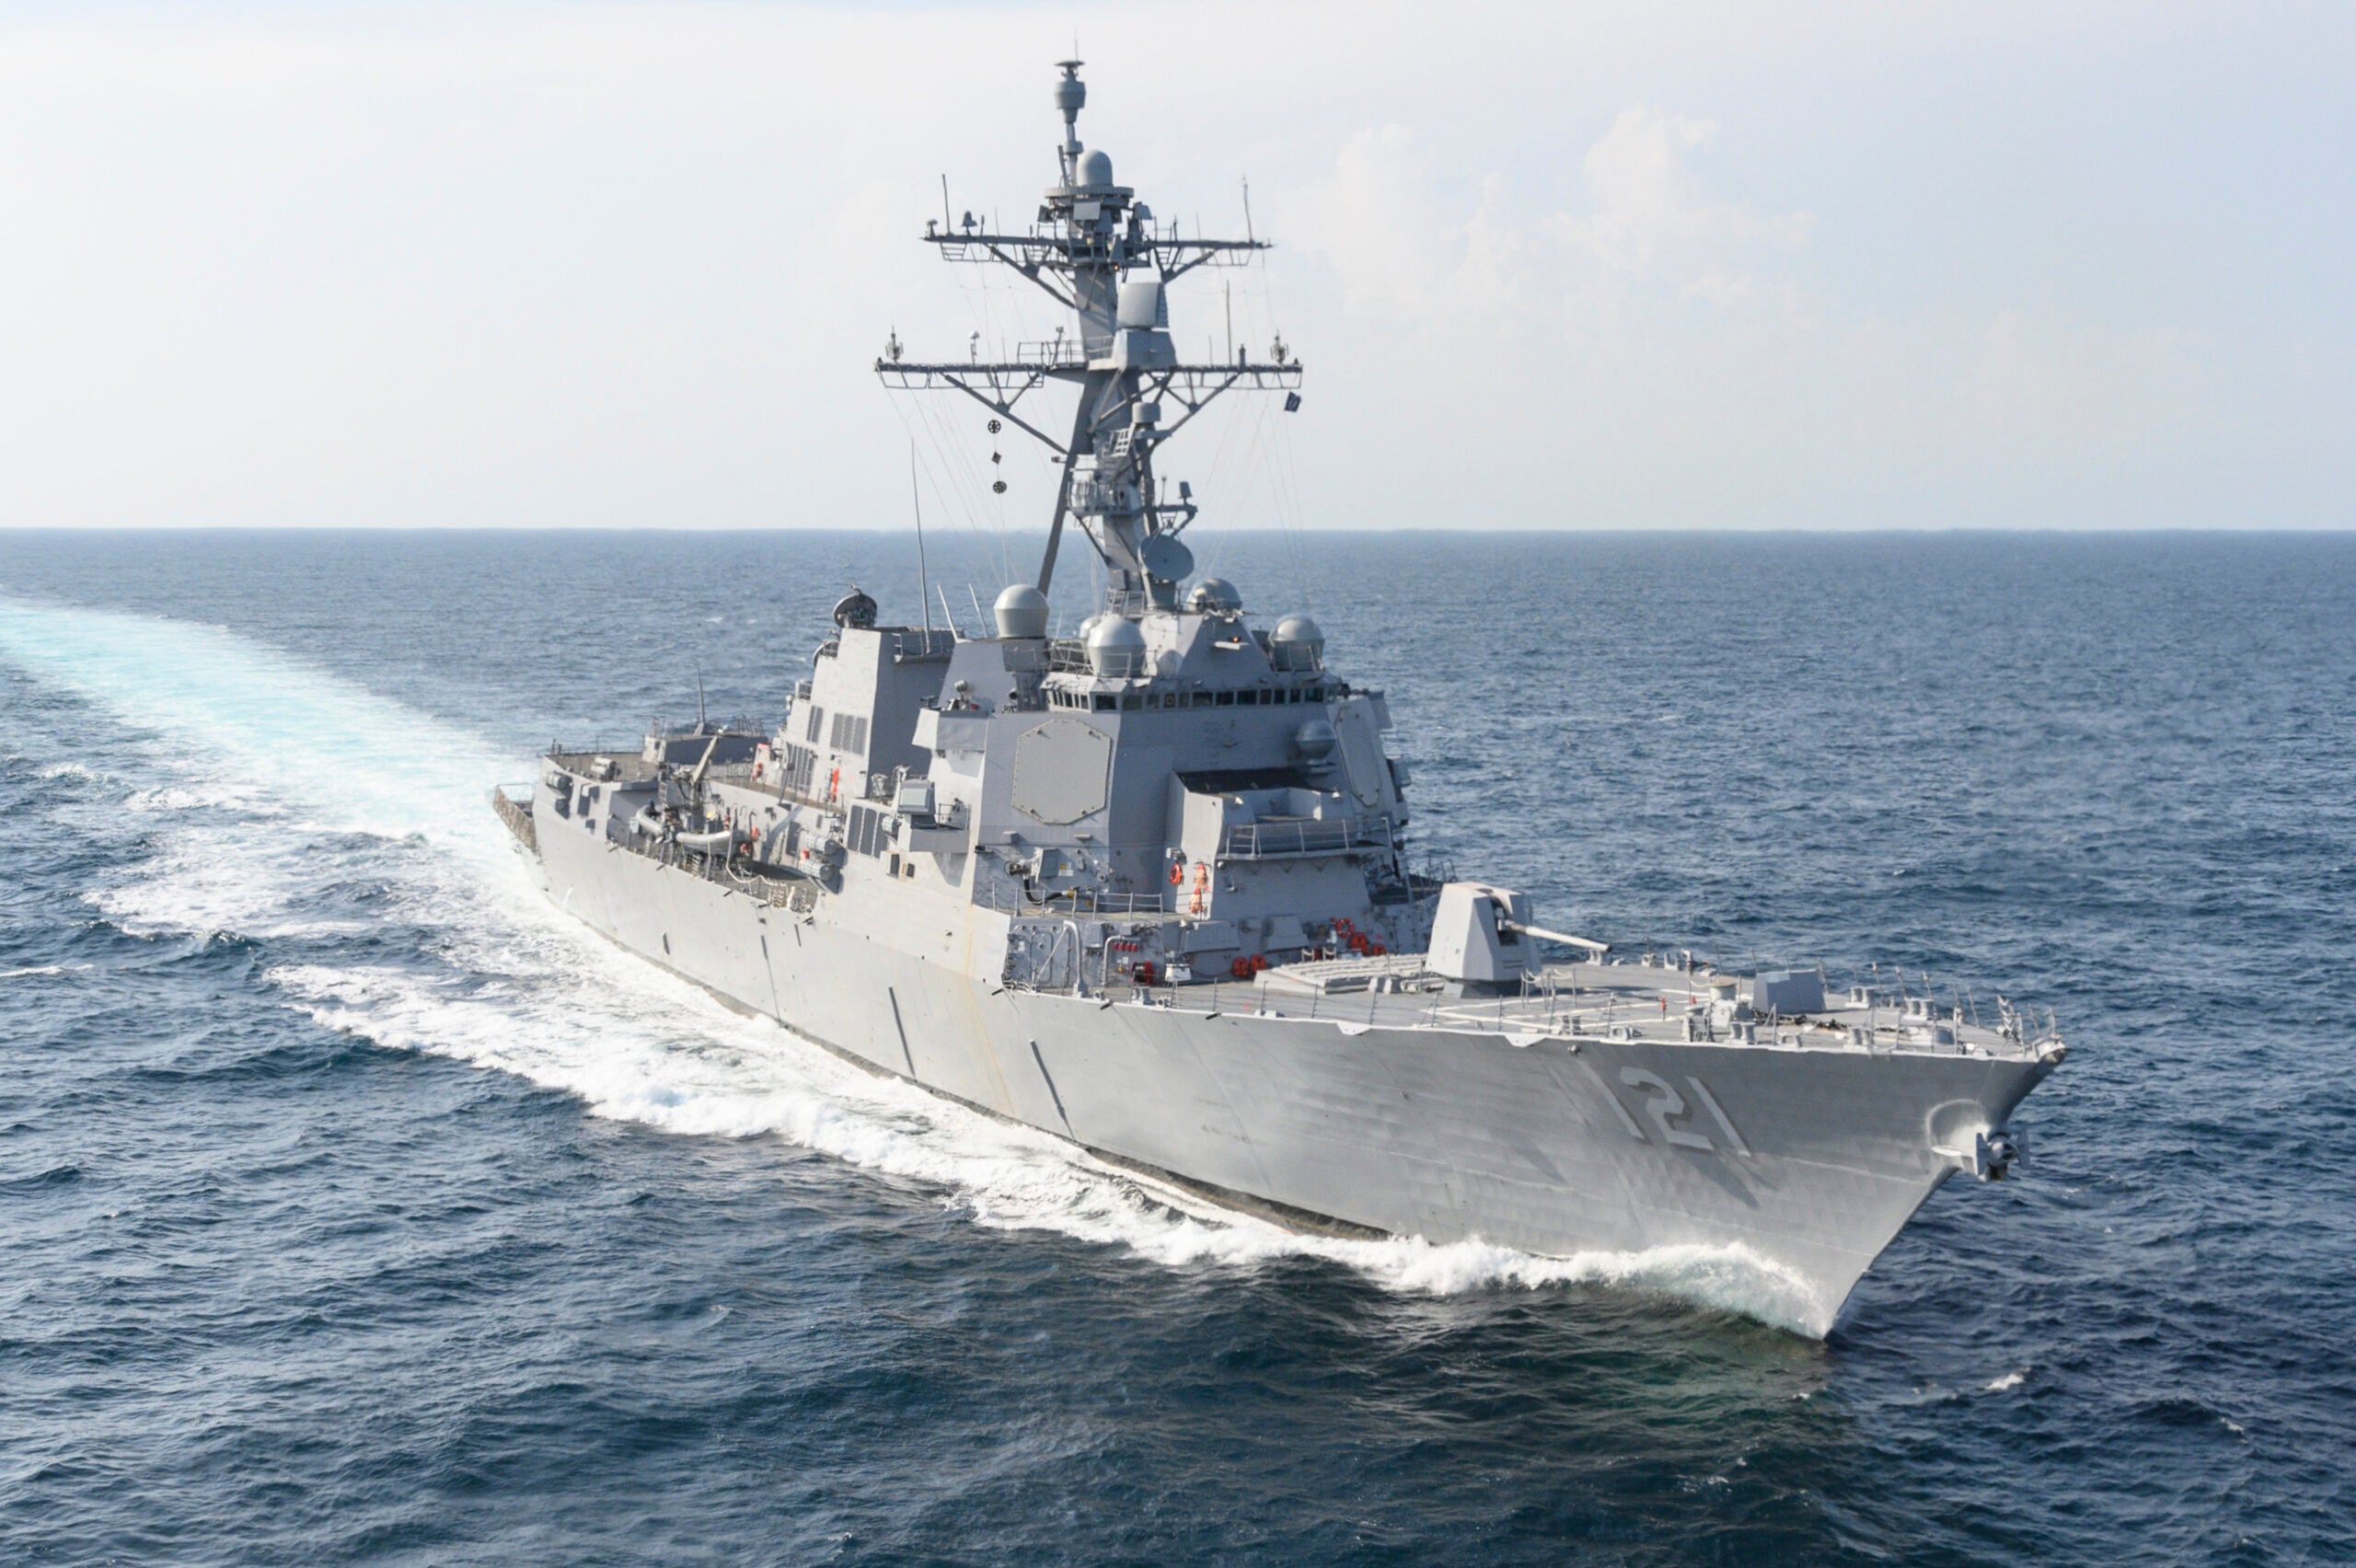 What is the next US Navy guided missile destroyer after the USS